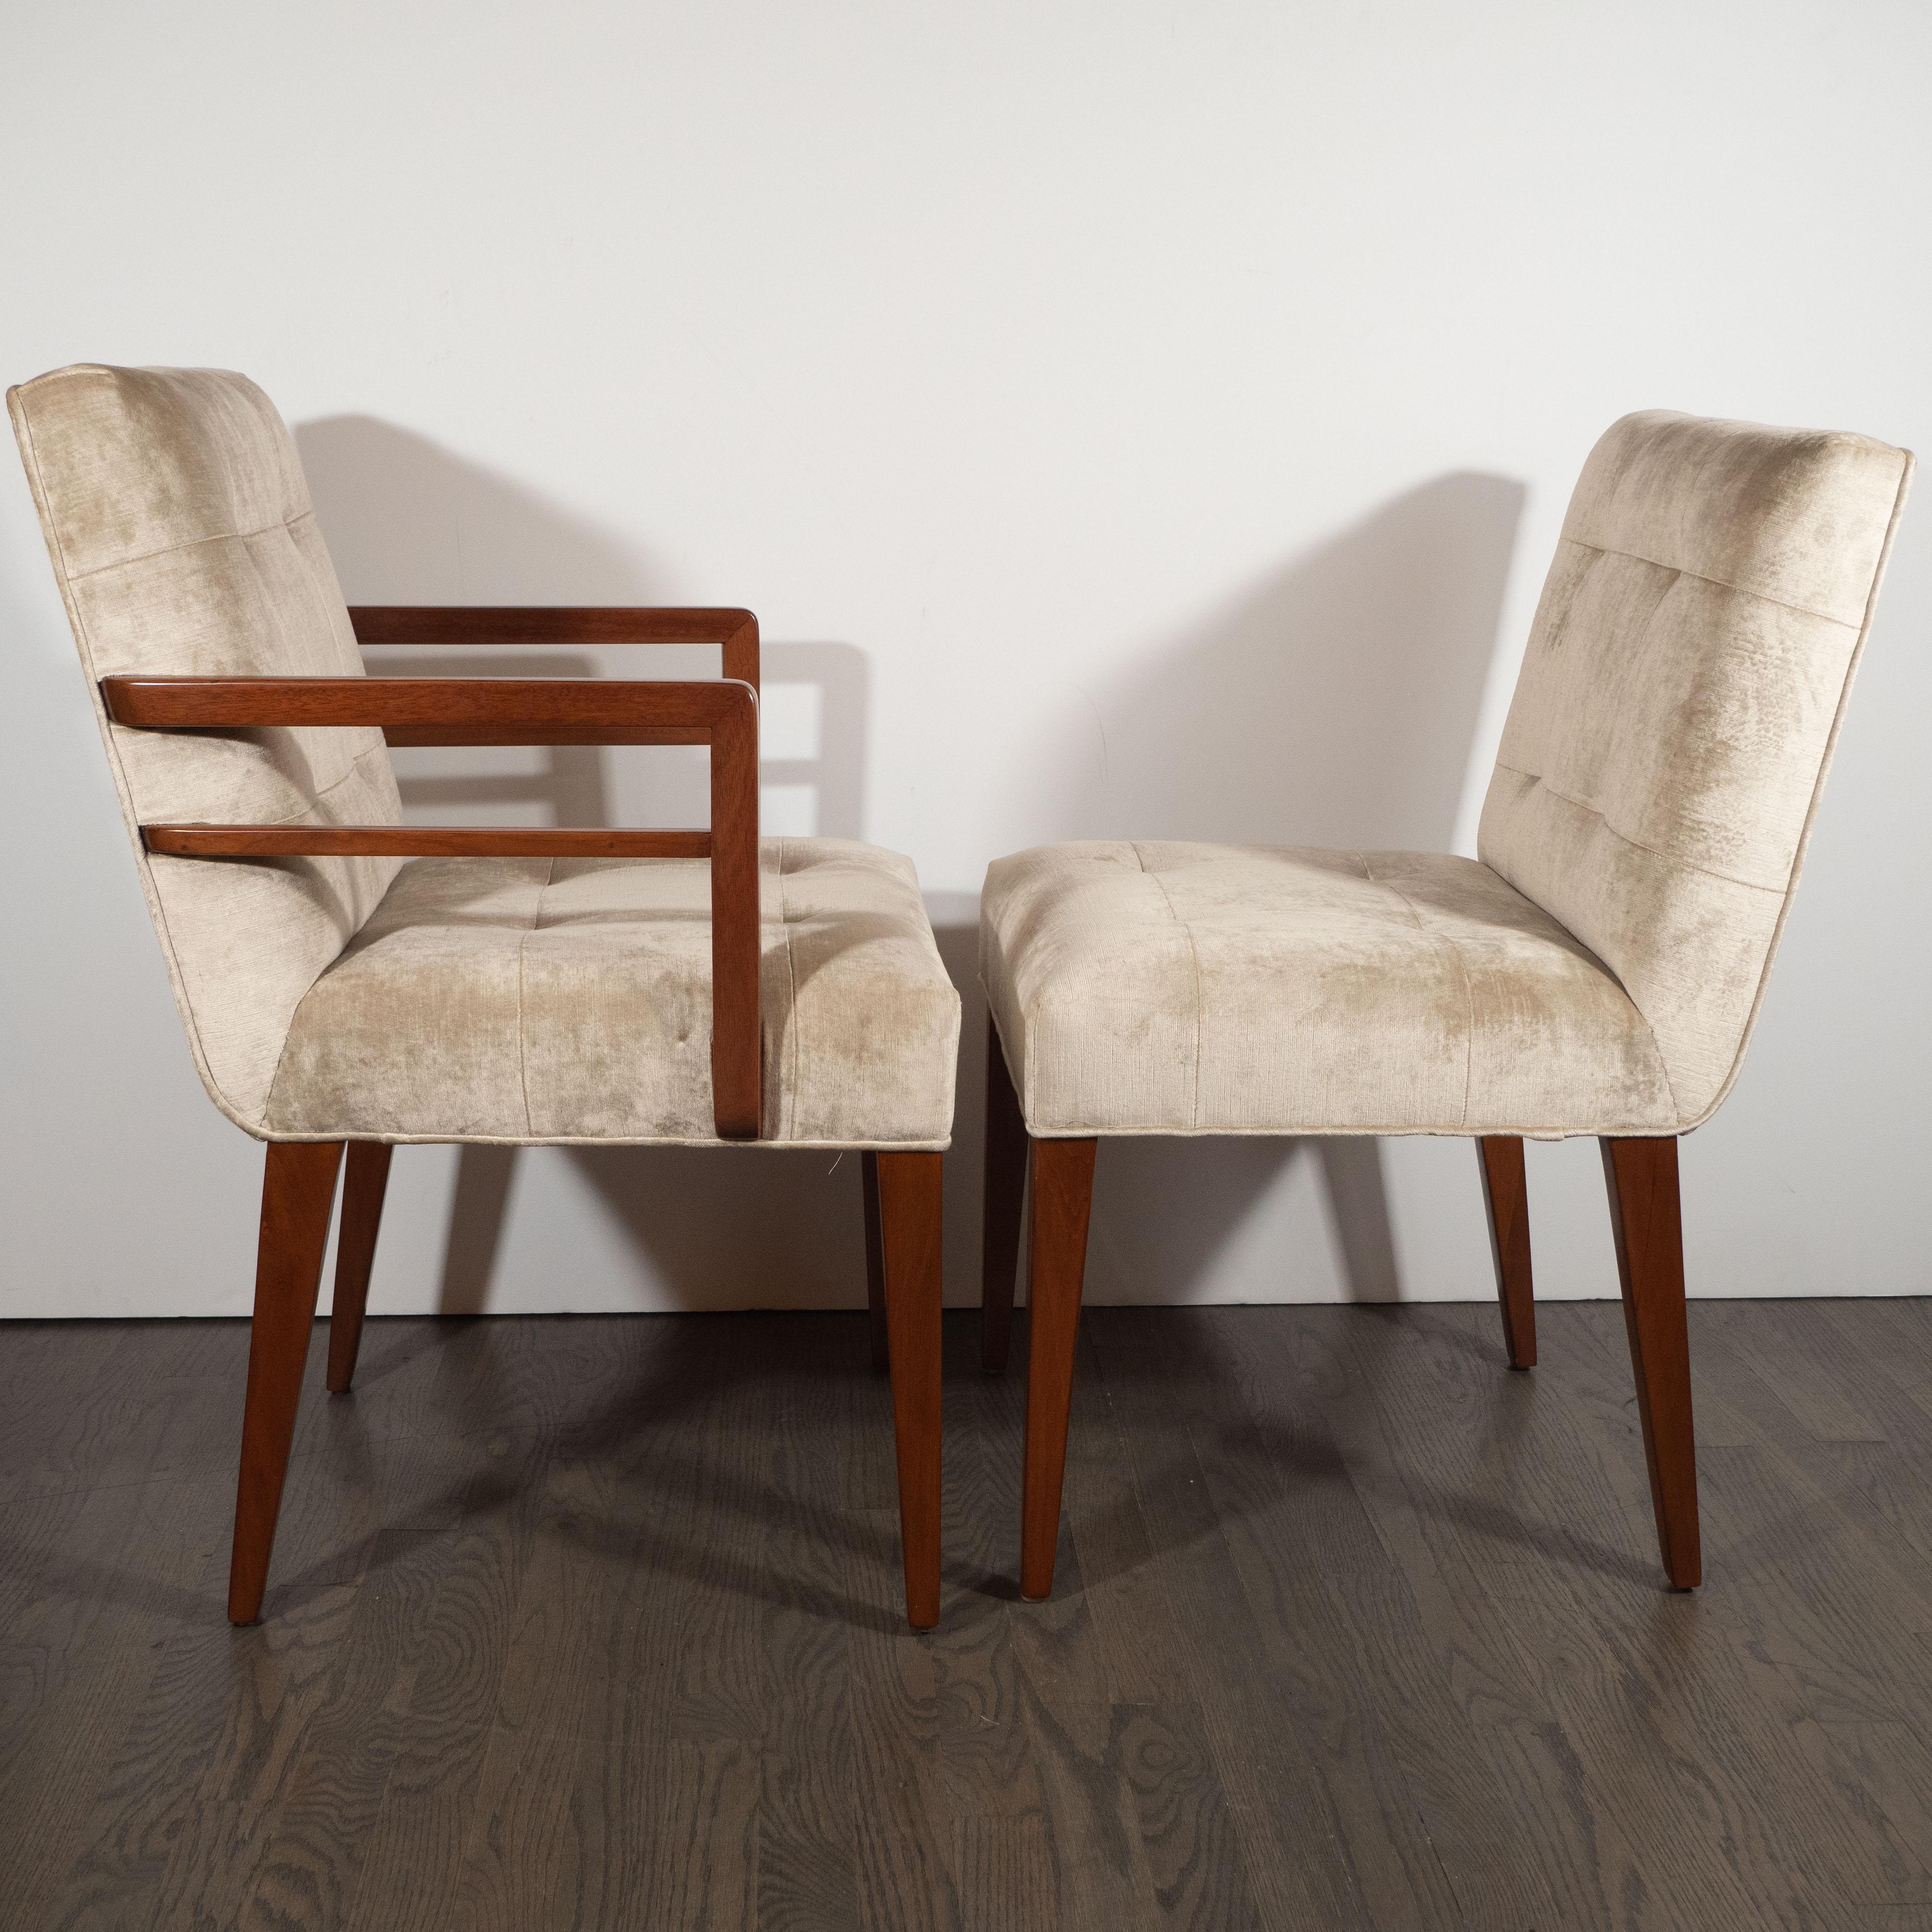 Set of Eight Art Deco Dining Chairs in Walnut & Champagne Velvet, Gilbert Rohde 1